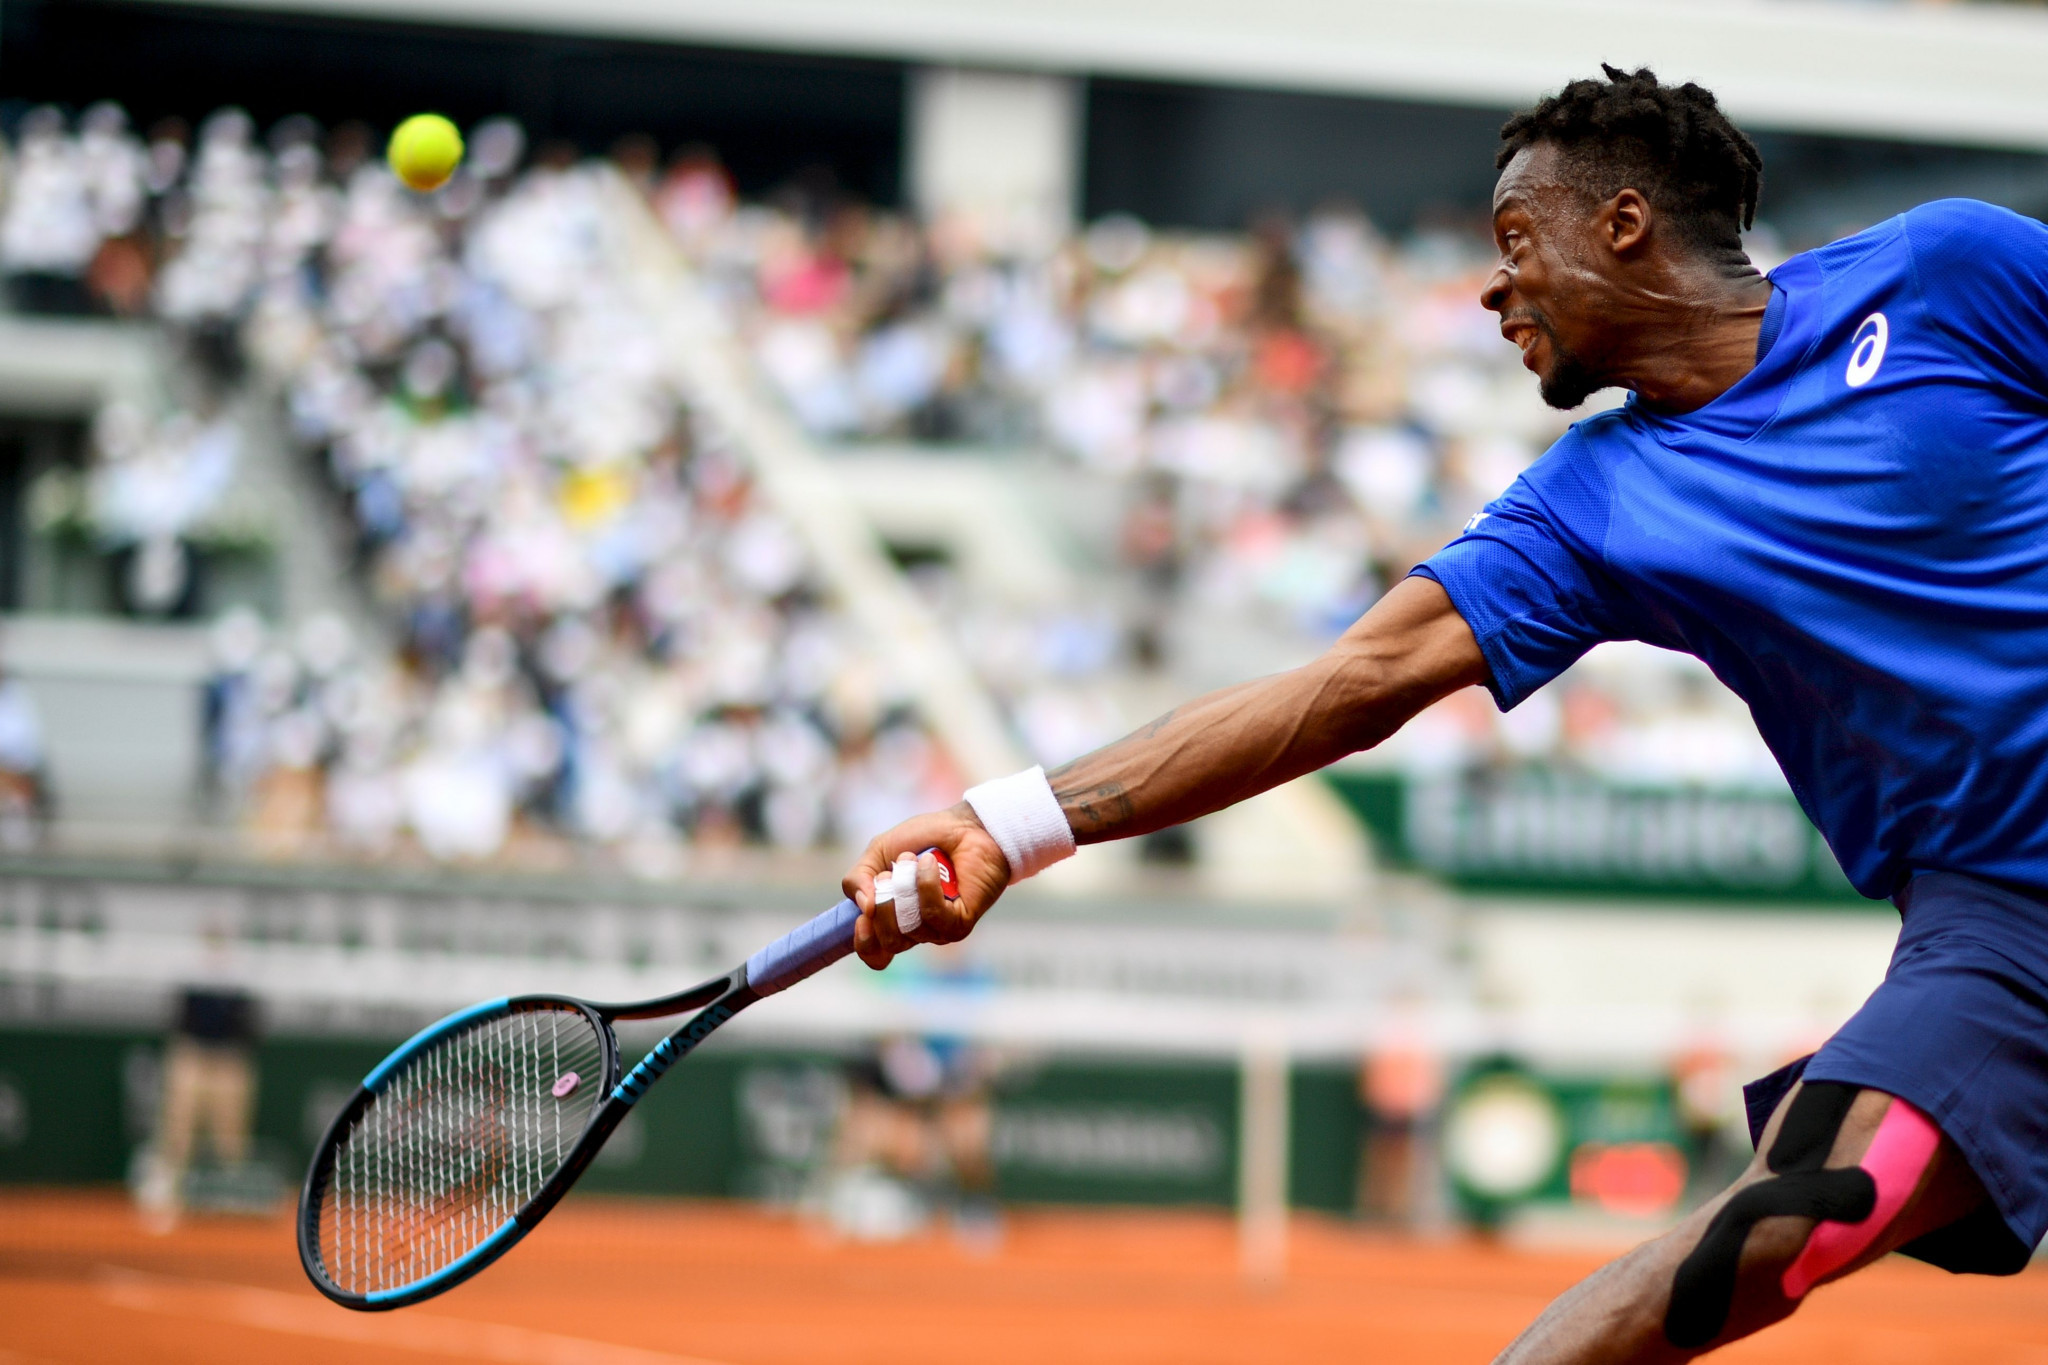 Gael Monfils was the last French player standing but lost to Dominic Thiem in straight sets ©Getty Images